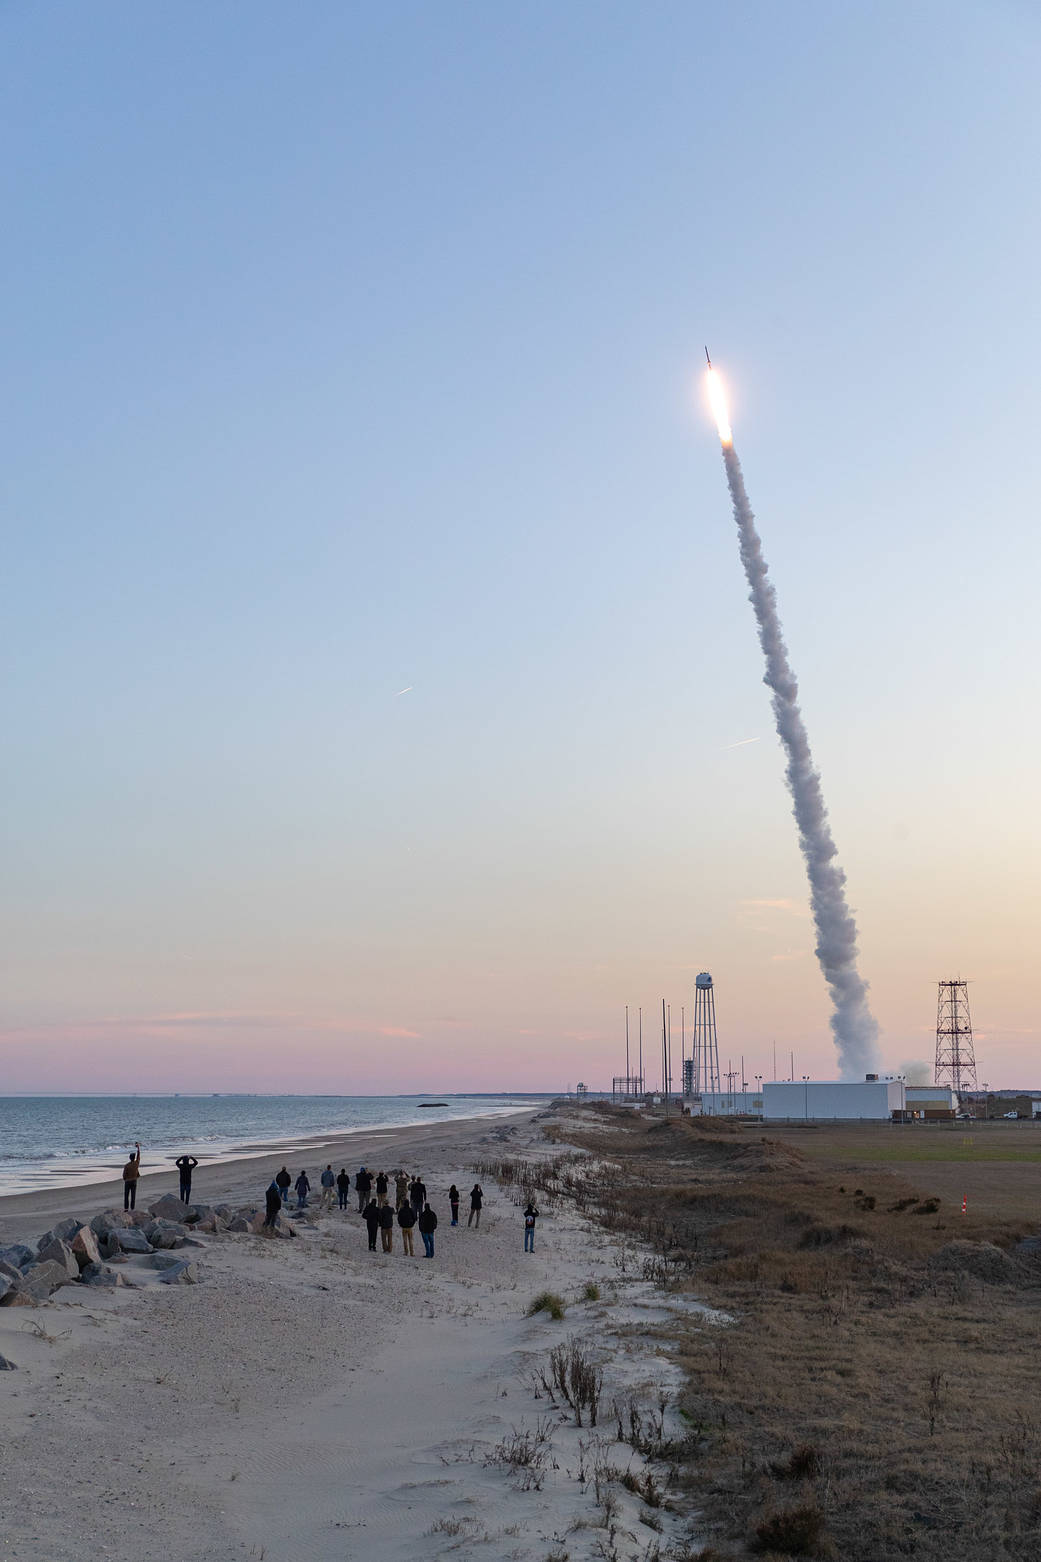 landscape photo with a small crowd of people in the foreground standing on a beach while watching the sounding rocket launch in the background against a dusky sky.